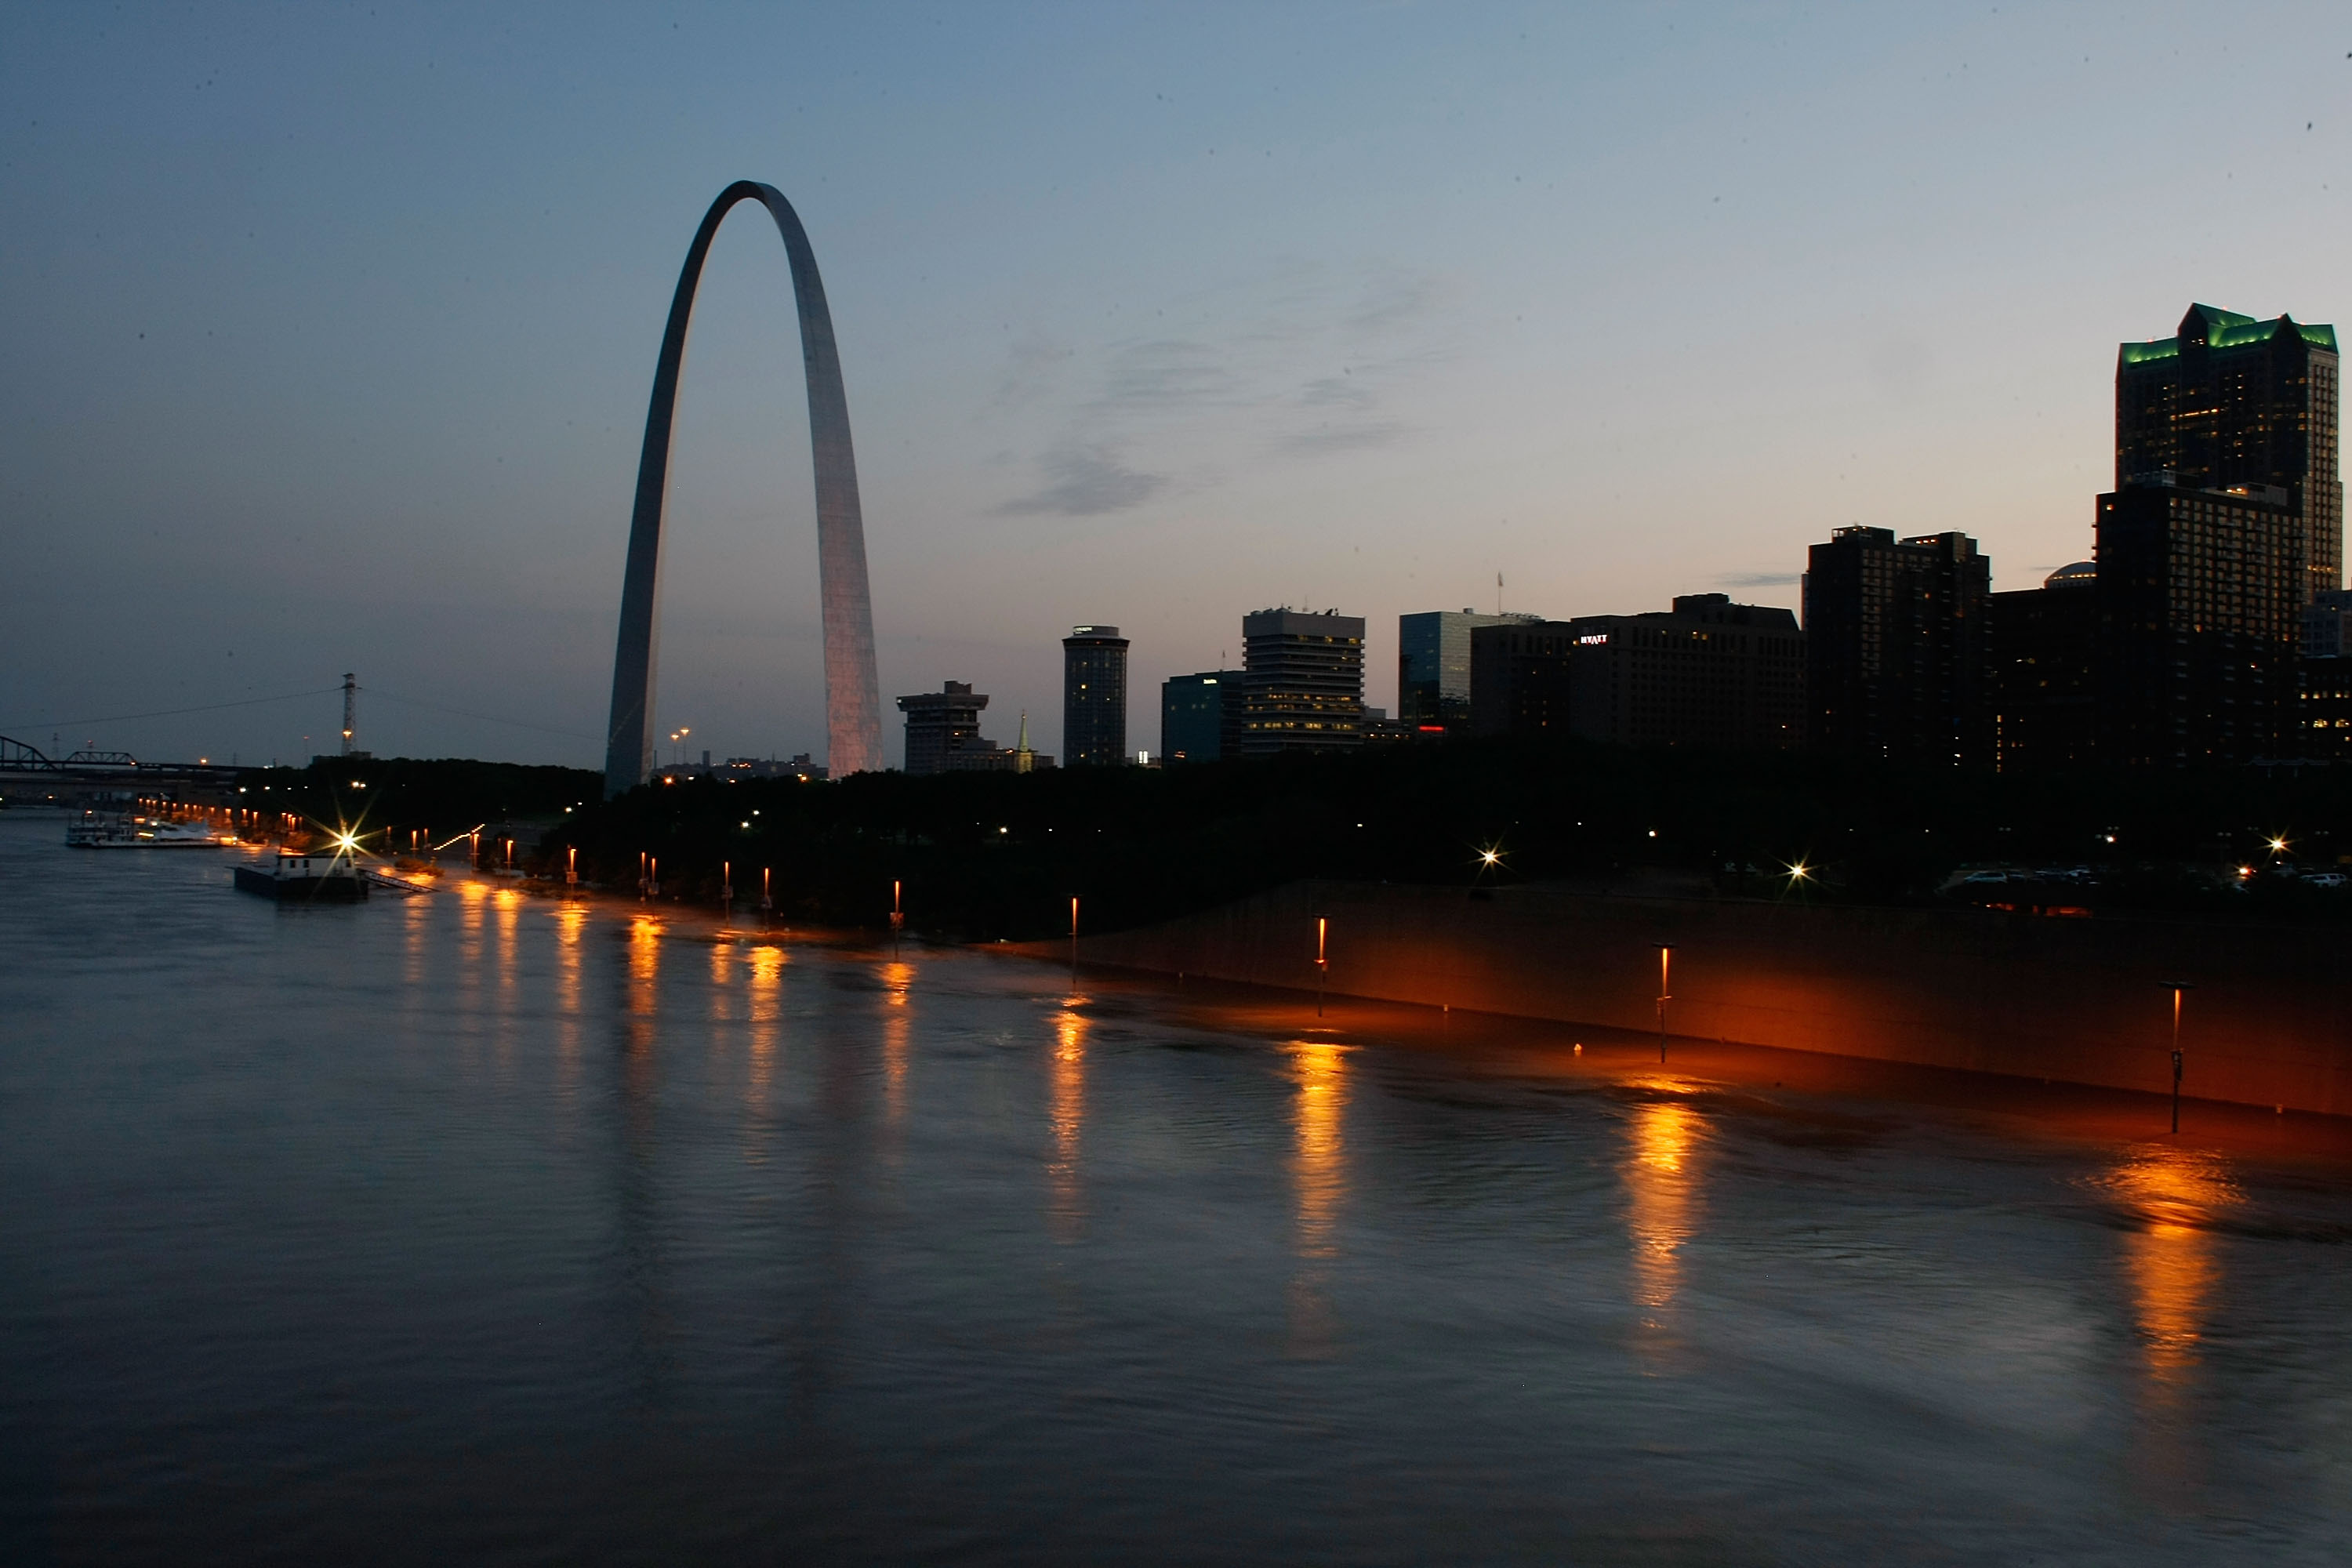 St. Louis prepares to celebrate the 4th of July for the first time since the pandemic